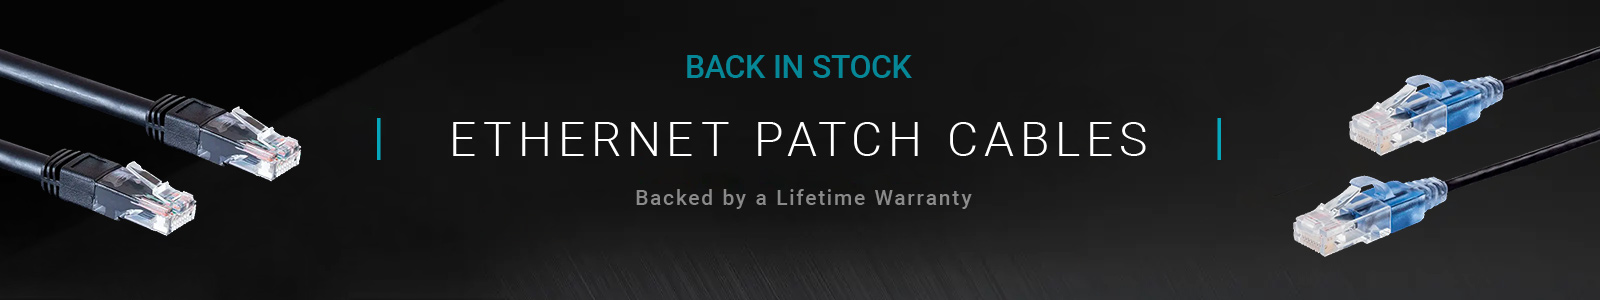 Back in Stock (tag)
Ethernet Patch Cables
Backed by a Lifetime Warranty
Shop Now